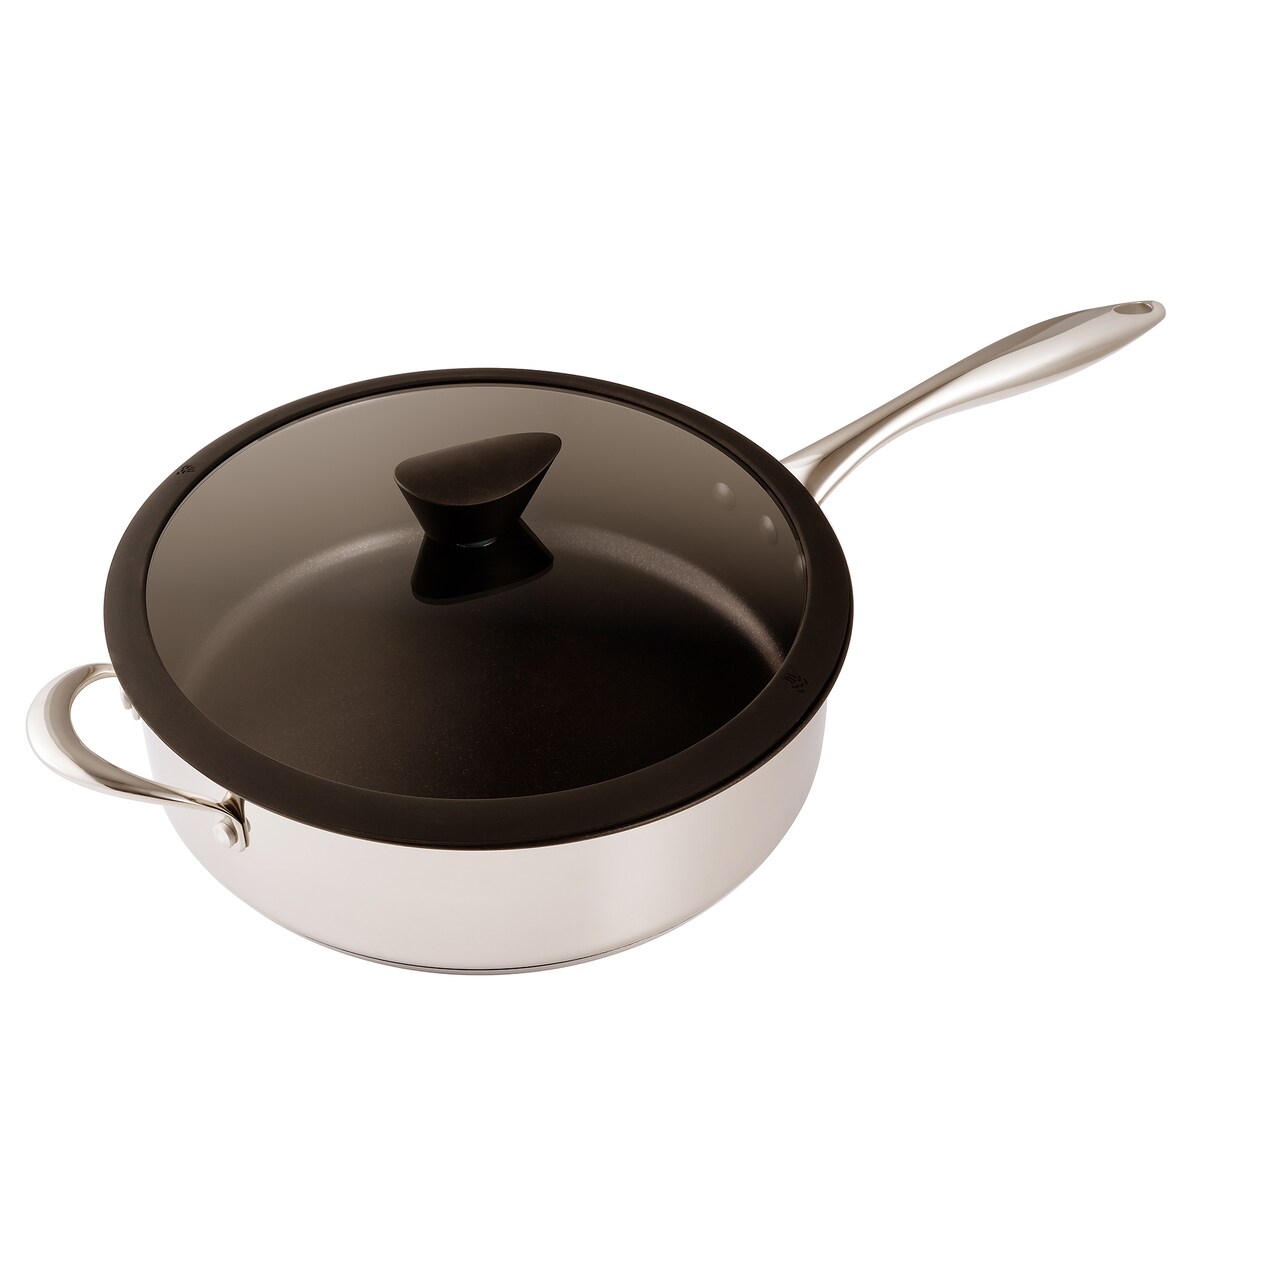 The Stainless Steel All-In-One Sauce Pan by Ozeri, with a 100